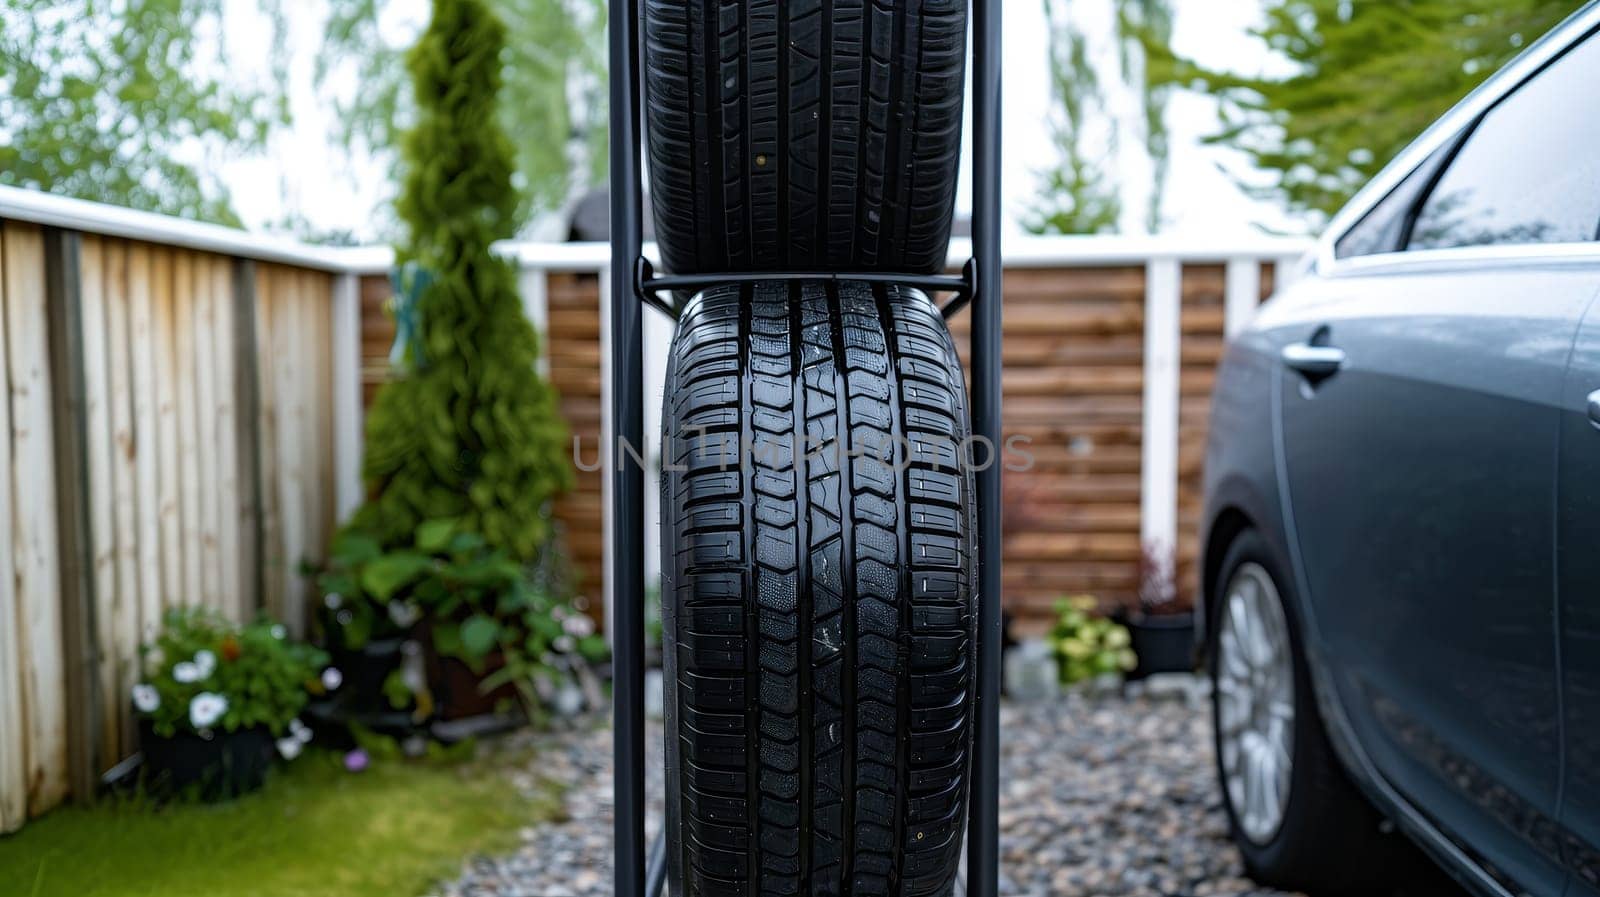 Car tires are vertically stacked in a residential outdoor setting, providing a contrast between the automotive elements and the greenery of a home garden. The tires are showcased in daylight